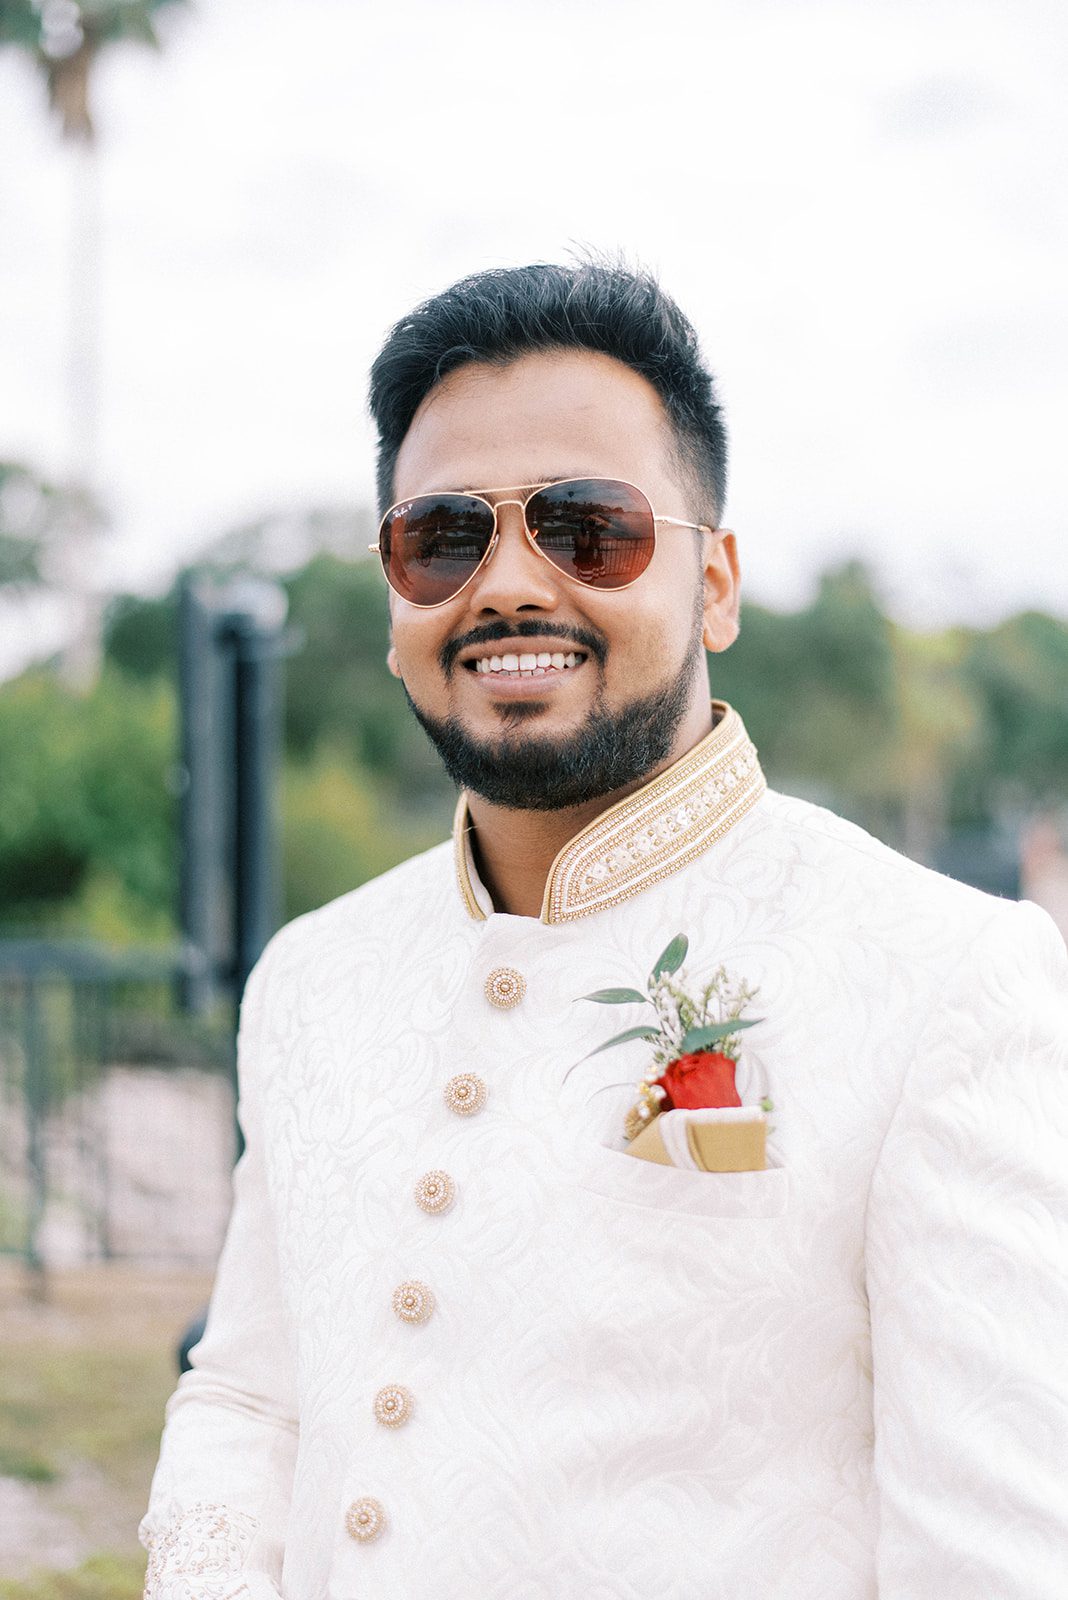 Indian groom wearing a traditionally white wedding suit with a red rose on his pocket